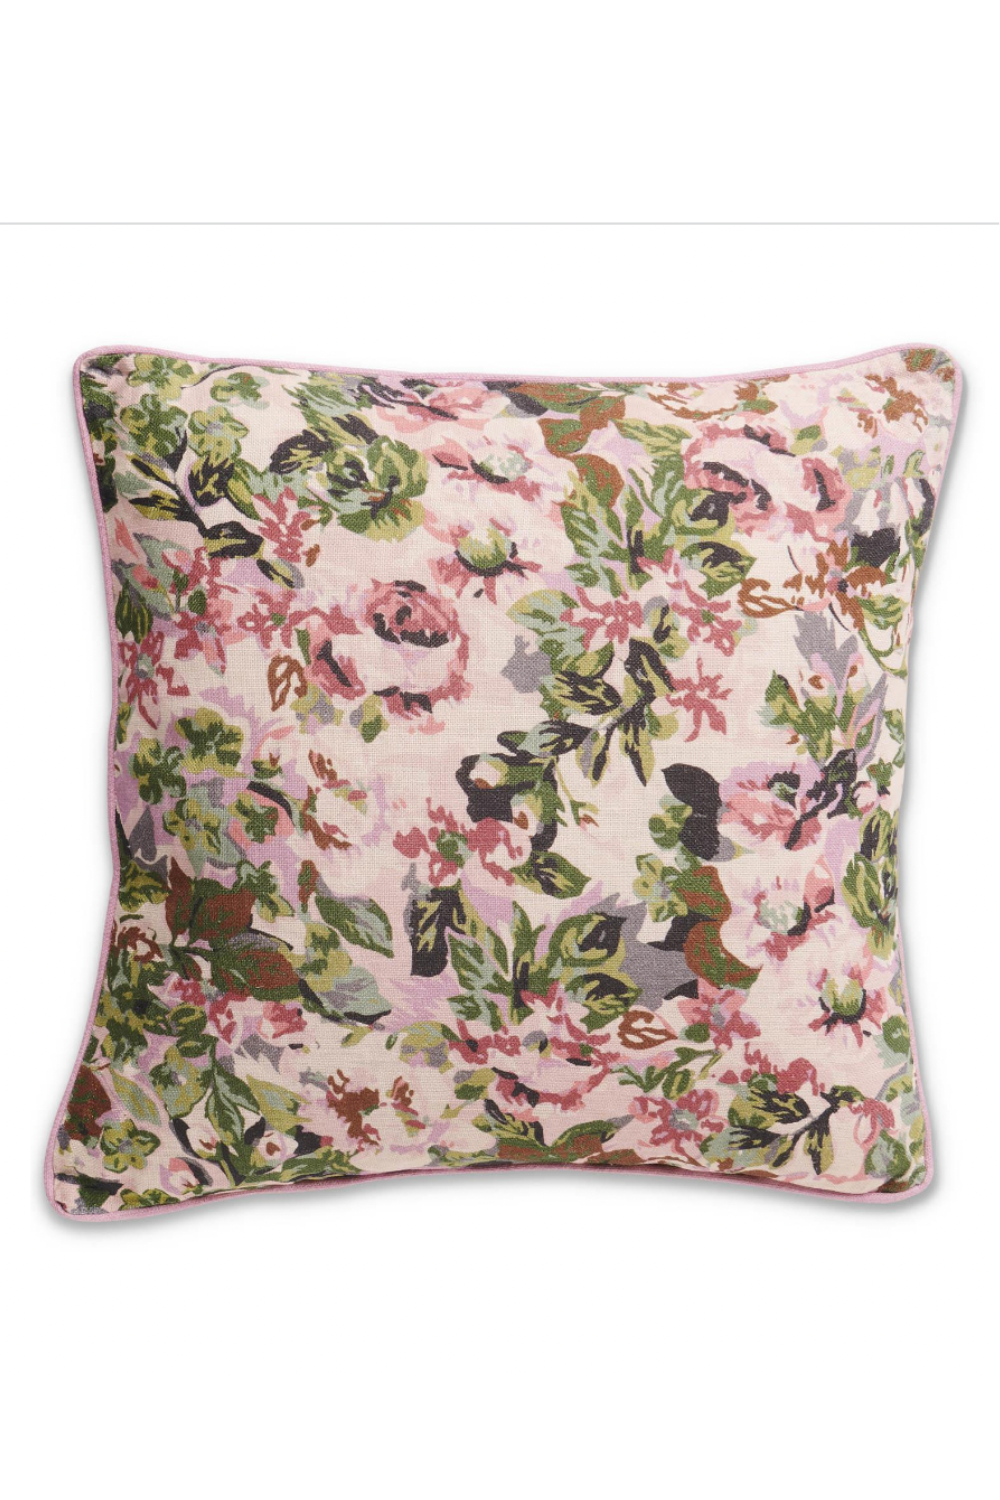 Garden Path Floral Upholstery Cushion One Size